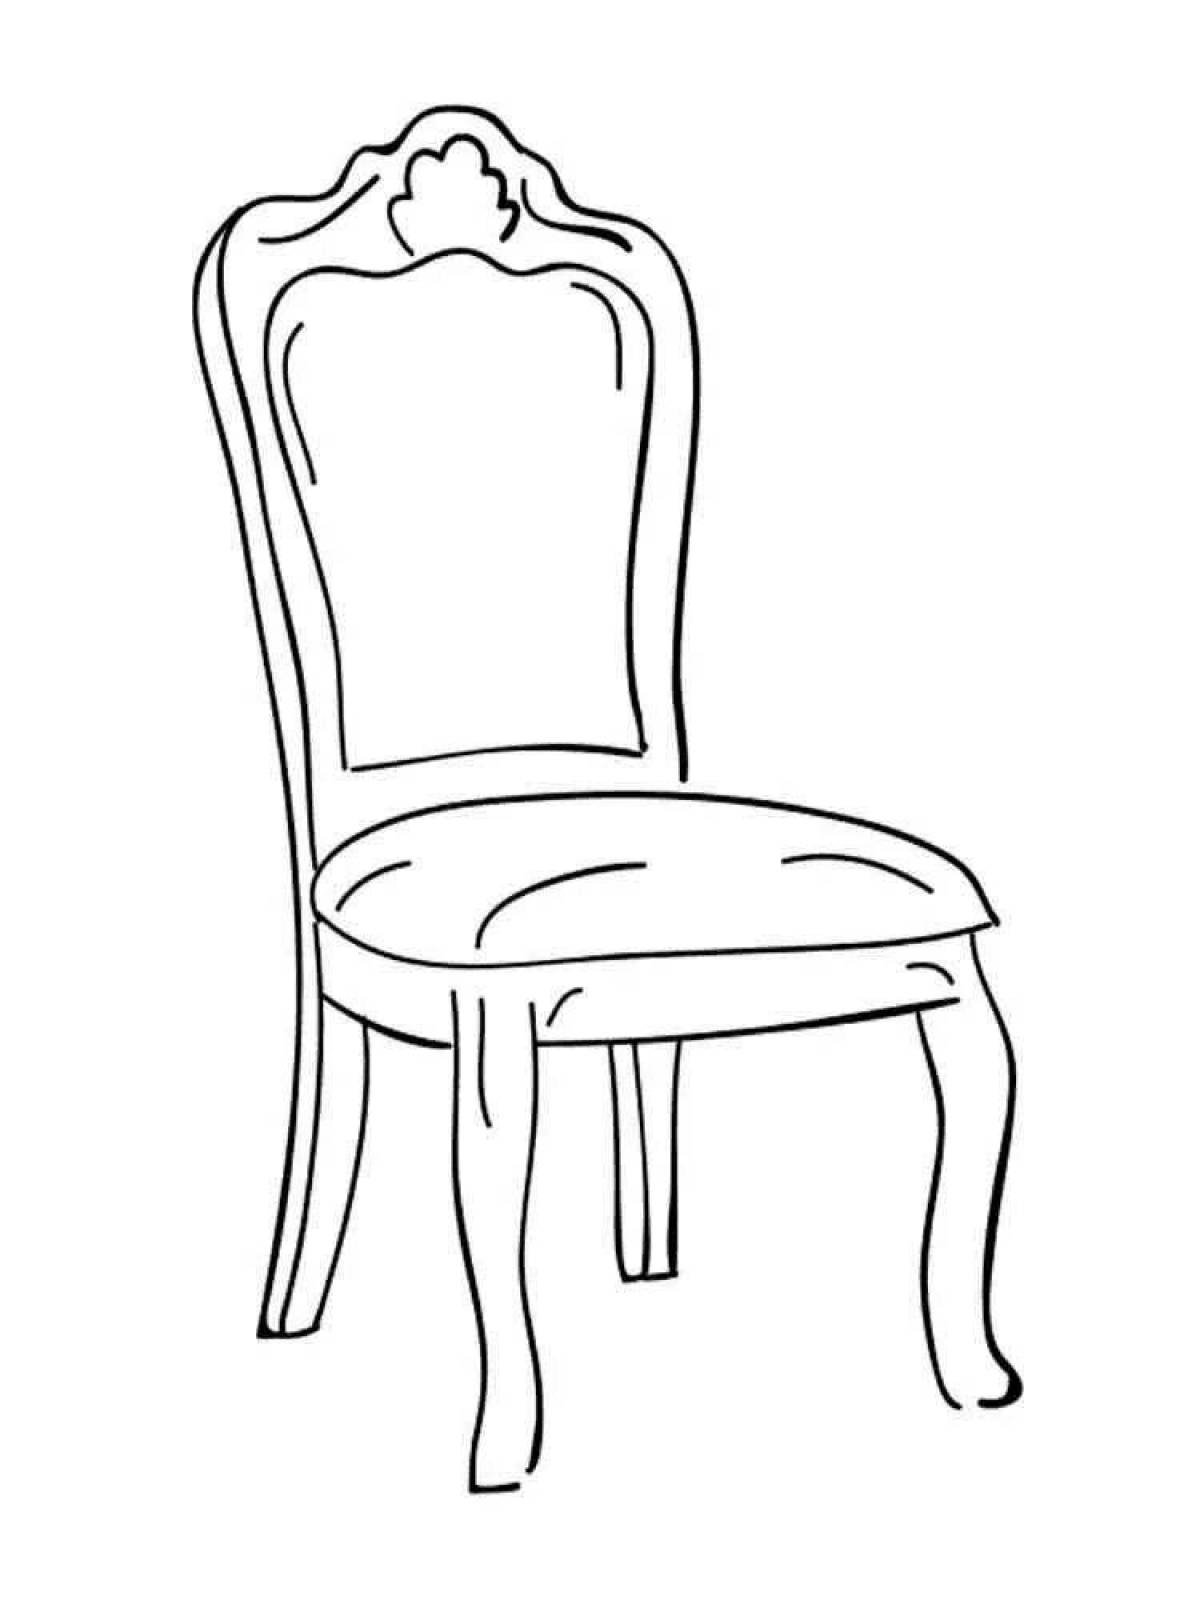 Coloring page stylish furniture